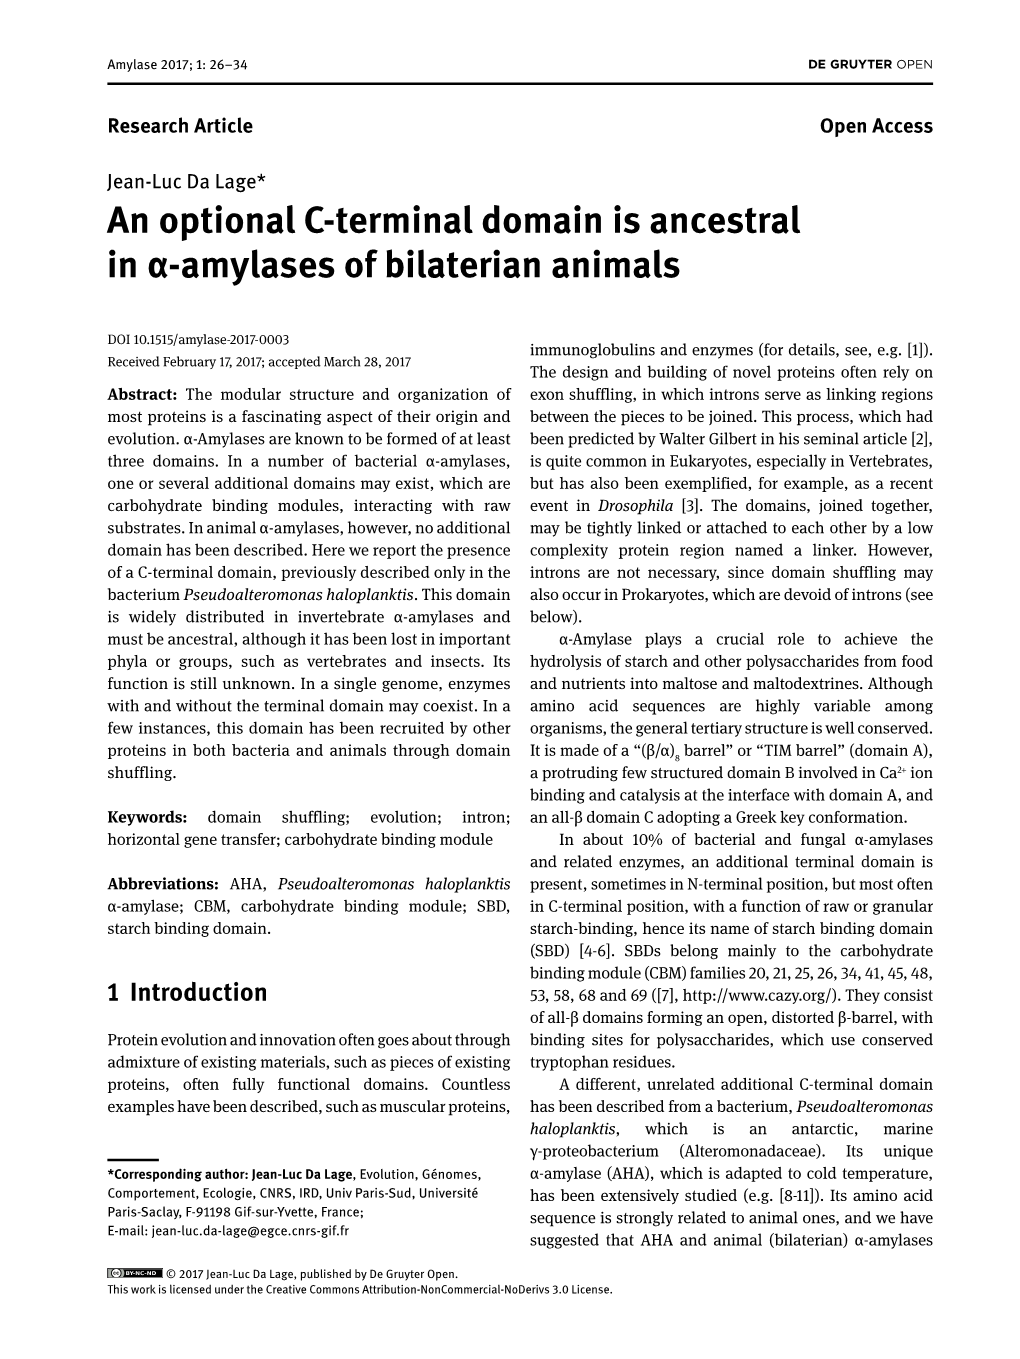 An Optional C-Terminal Domain Is Ancestral in Α-Amylases of Bilaterian Animals